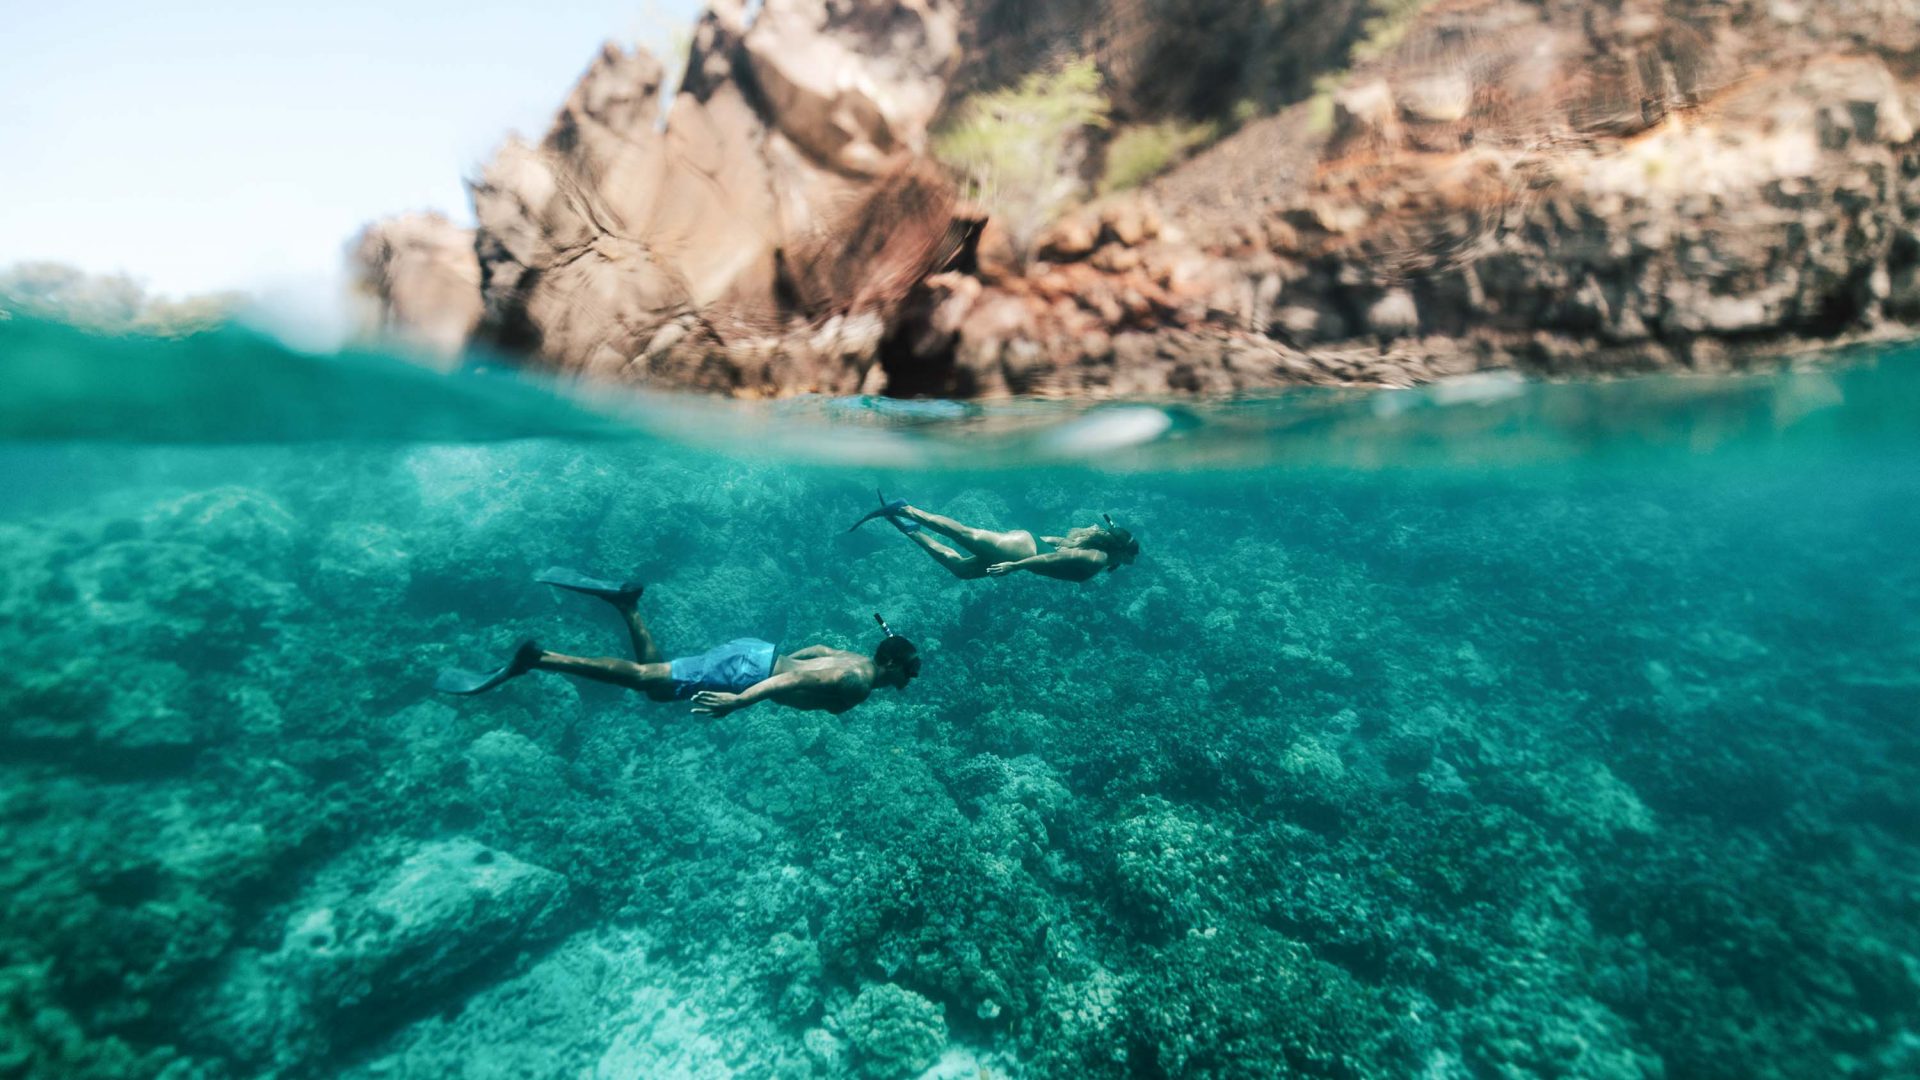 Snorkelers seen just below the surface of the water. Rocks can be seen above them.